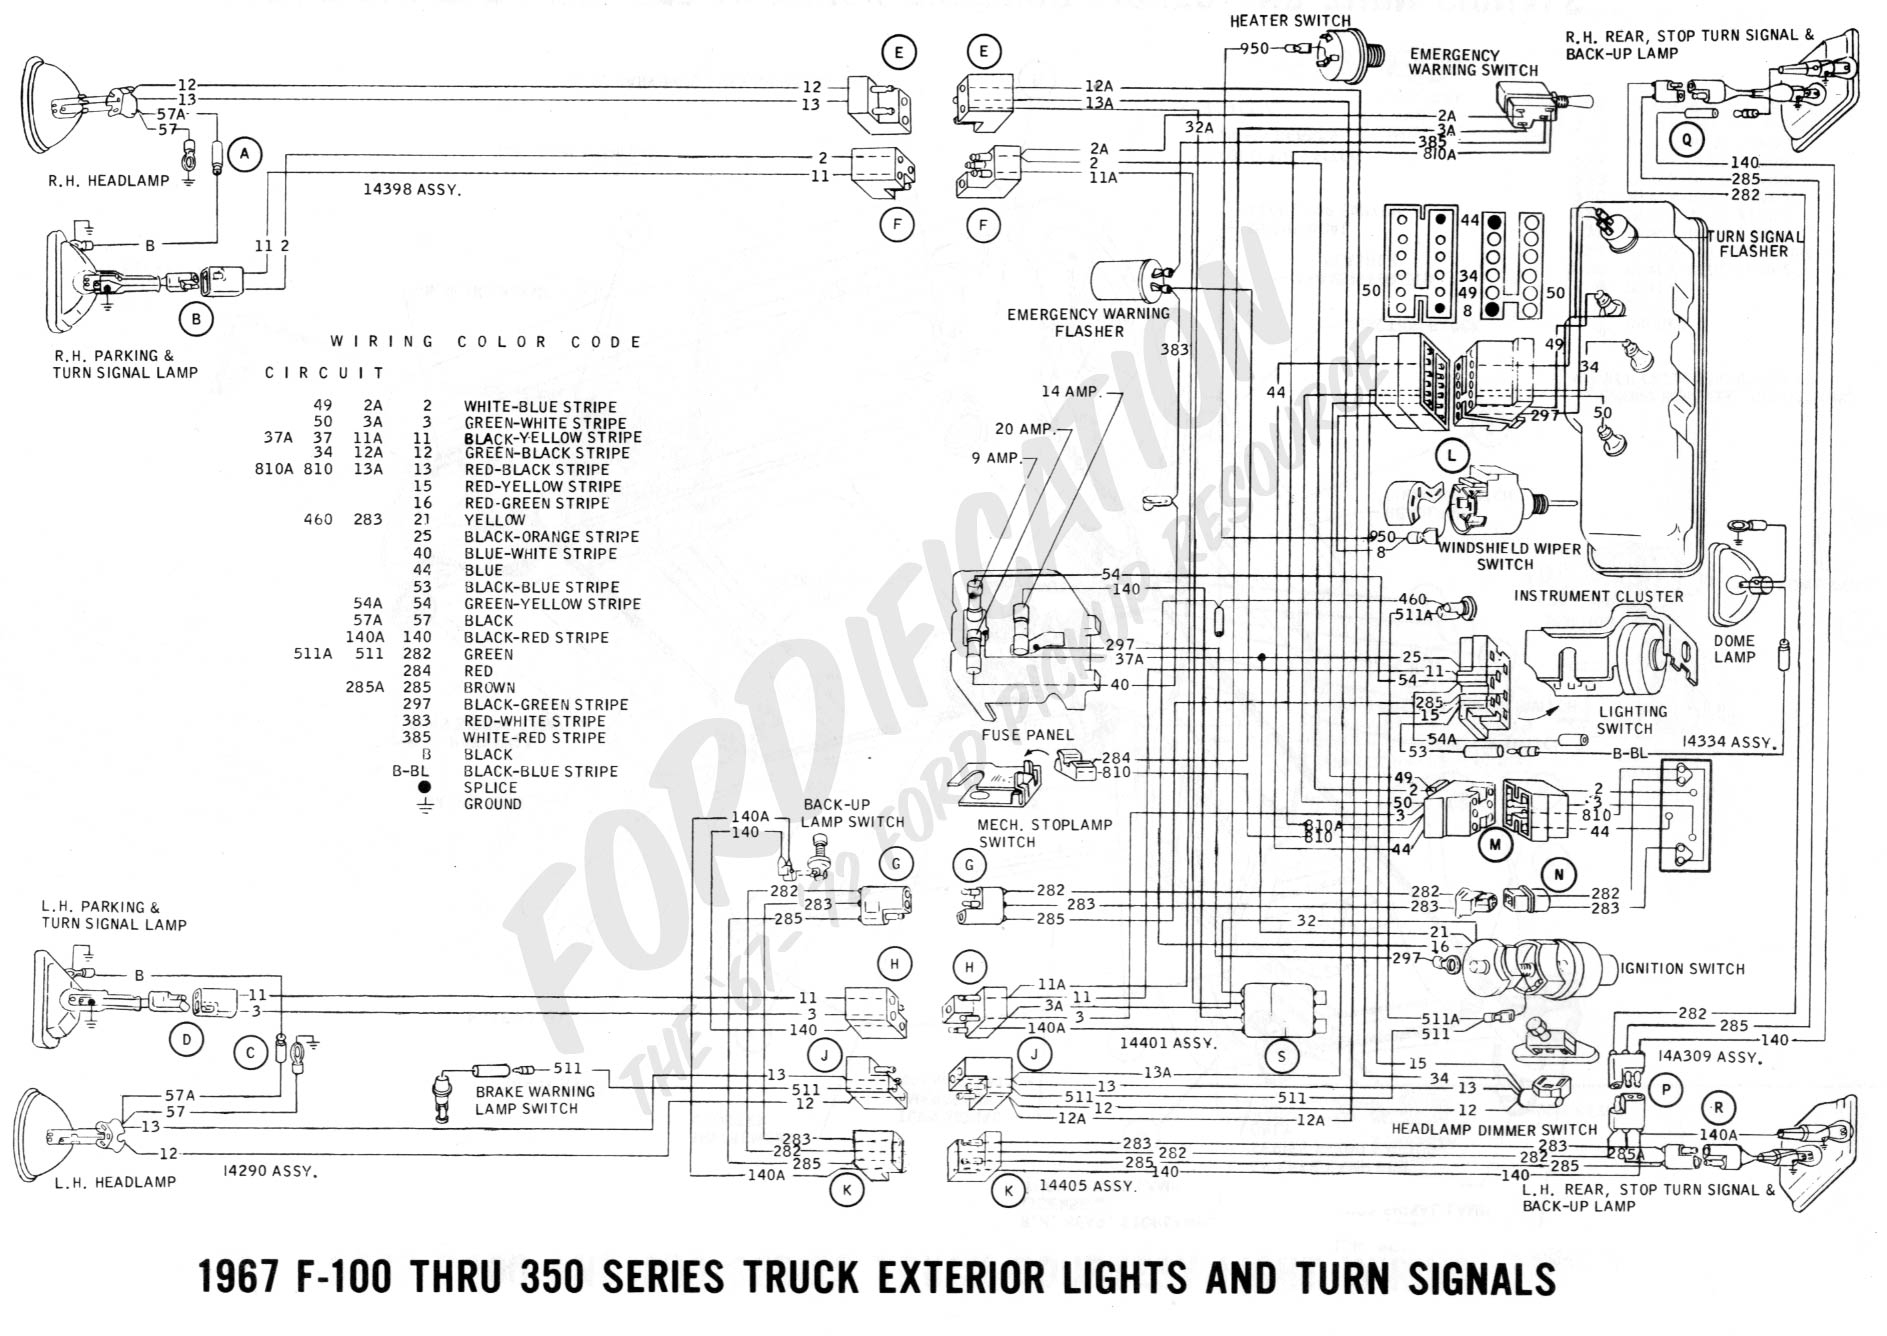 1970 Ford Truck Wiring Diagrams | Wiring Diagram - Ford F150 Trailer Wiring Harness Diagram